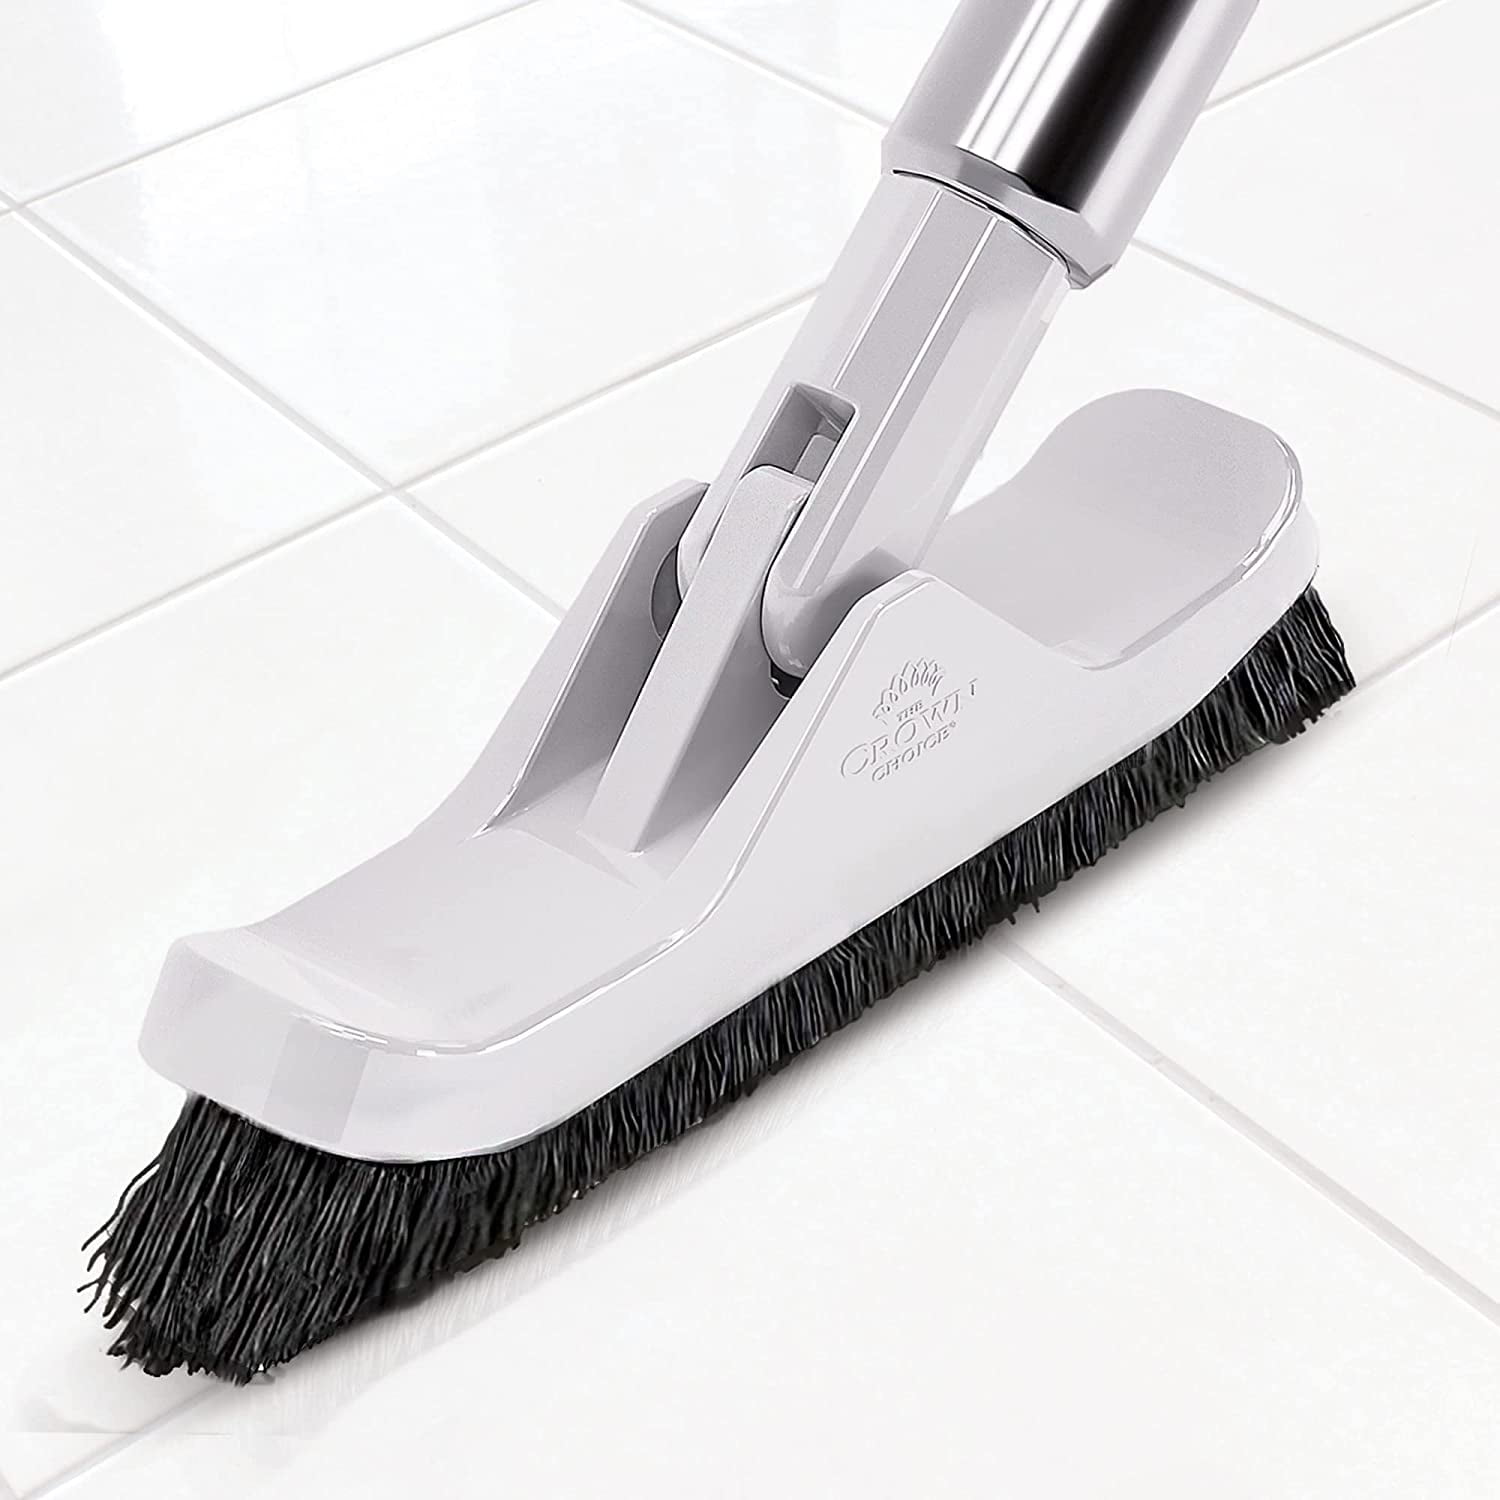 Grout Brush with Adjustable Long Handle,Swivel Cleaning Grout Line Scrubber V-Shaped Stiff Bristles Grout Cleaner Corner Brush for Bathroom Tub Tile